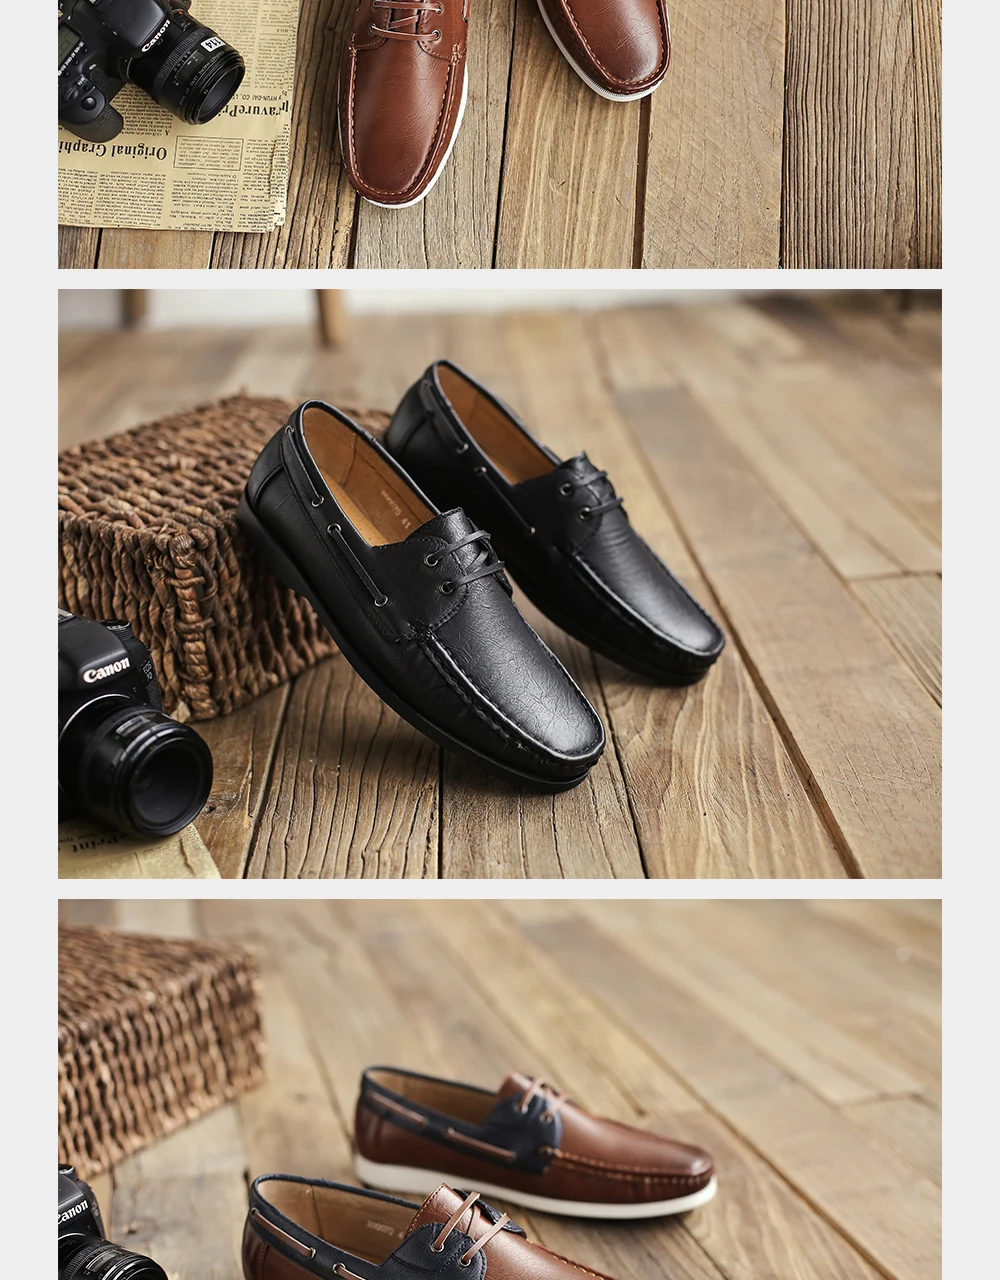 2020 New drive Moccasin Footwear Comfy Fashion Mixed Clors Luxury Leahter Boat Shoes Comfy Men Casual Shoes Men Loafers Shoes